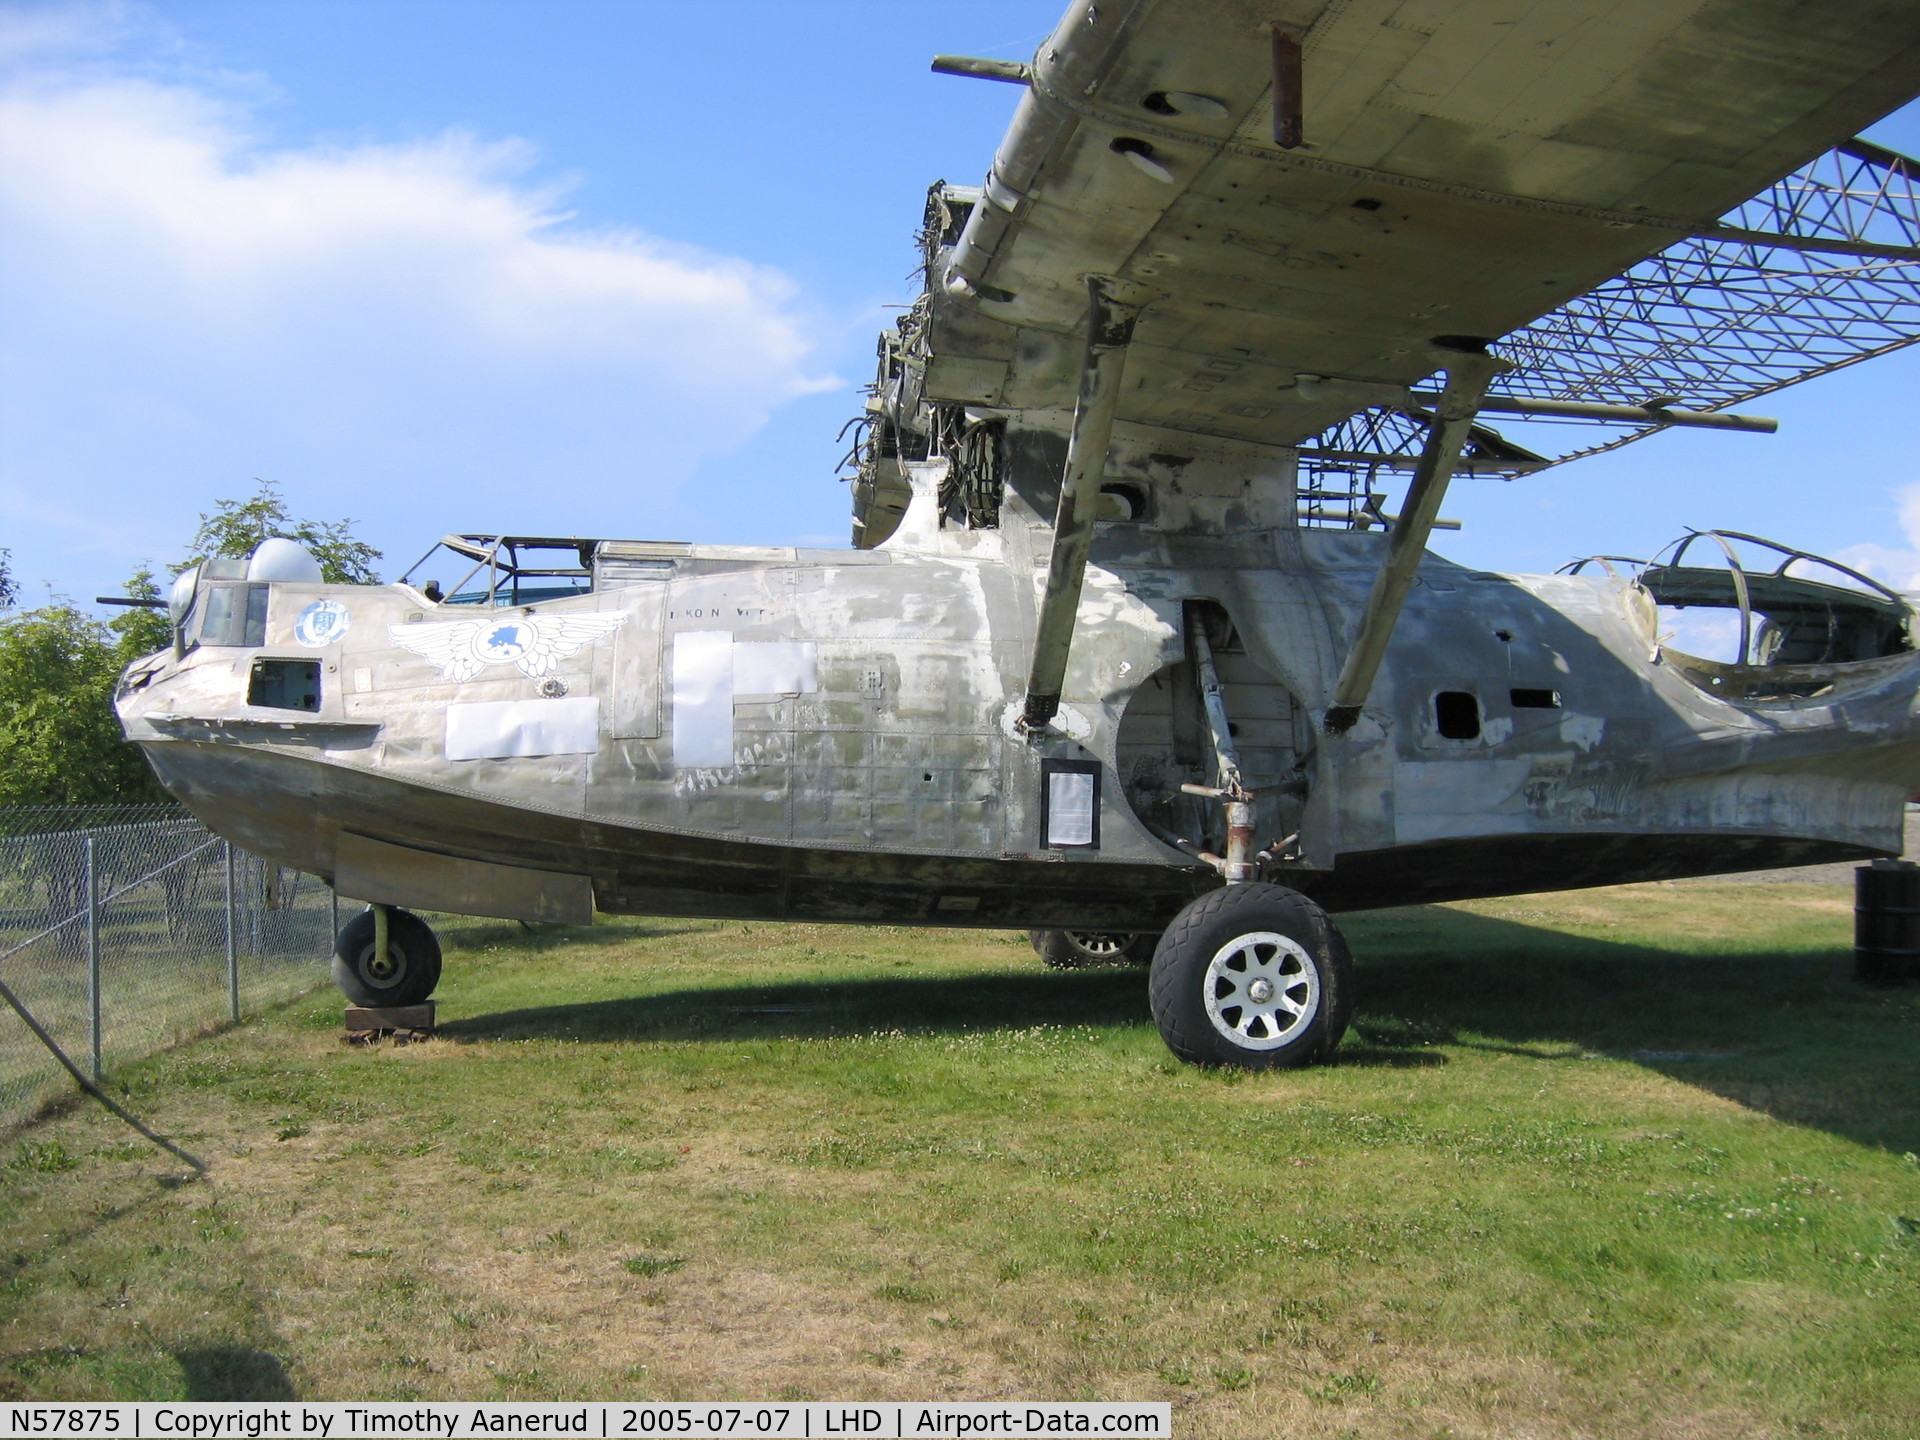 N57875, Consolidated Vultee PBY-5A C/N 44-33954, also known as CV-465, Bu67918, previously registered as N44BY, Alaska Aviation Heritage Museum